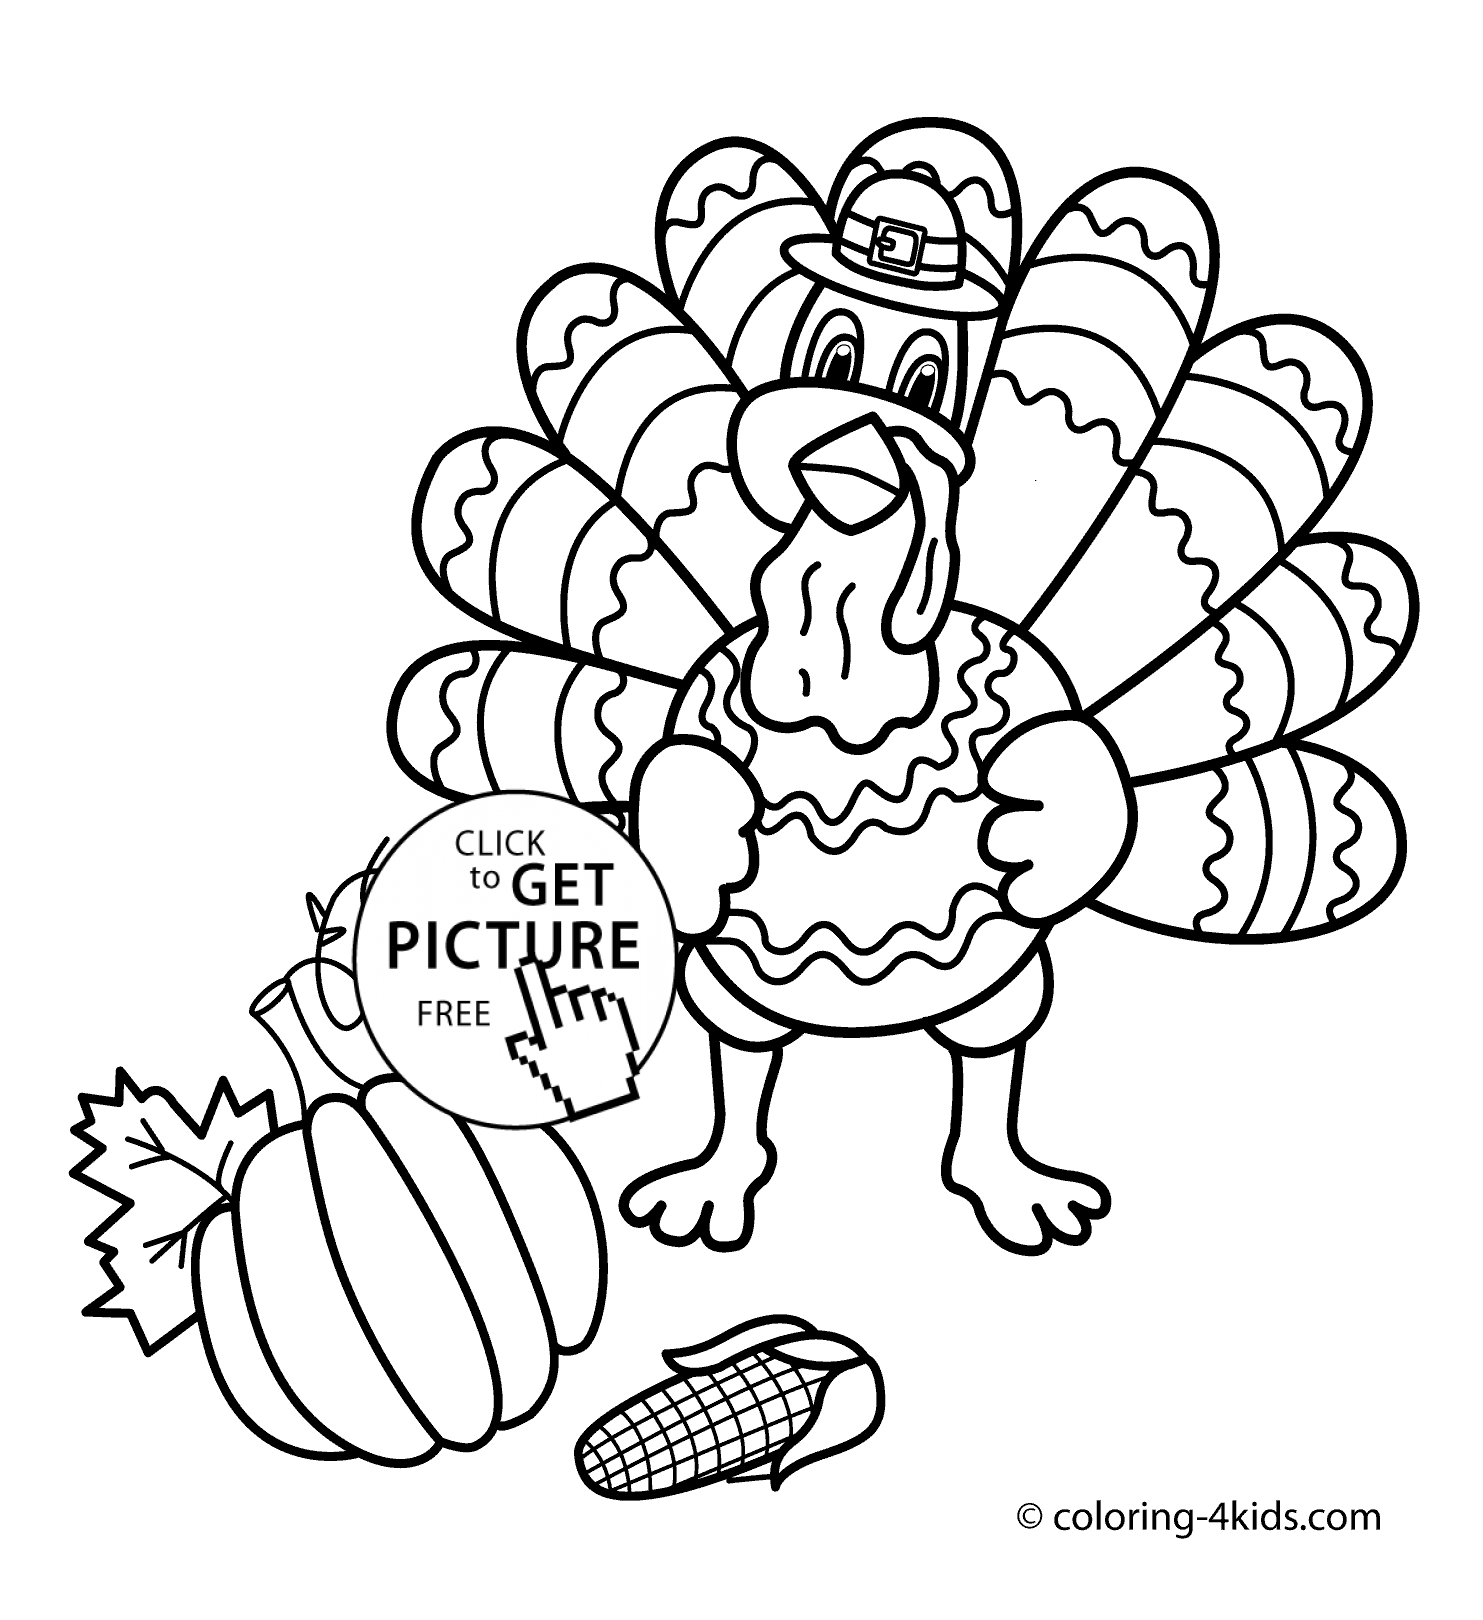 Thanksgiving Day Coloring Pages Free Thanksgiving Day Coloring Pages With Turkey For Kids Printable Free